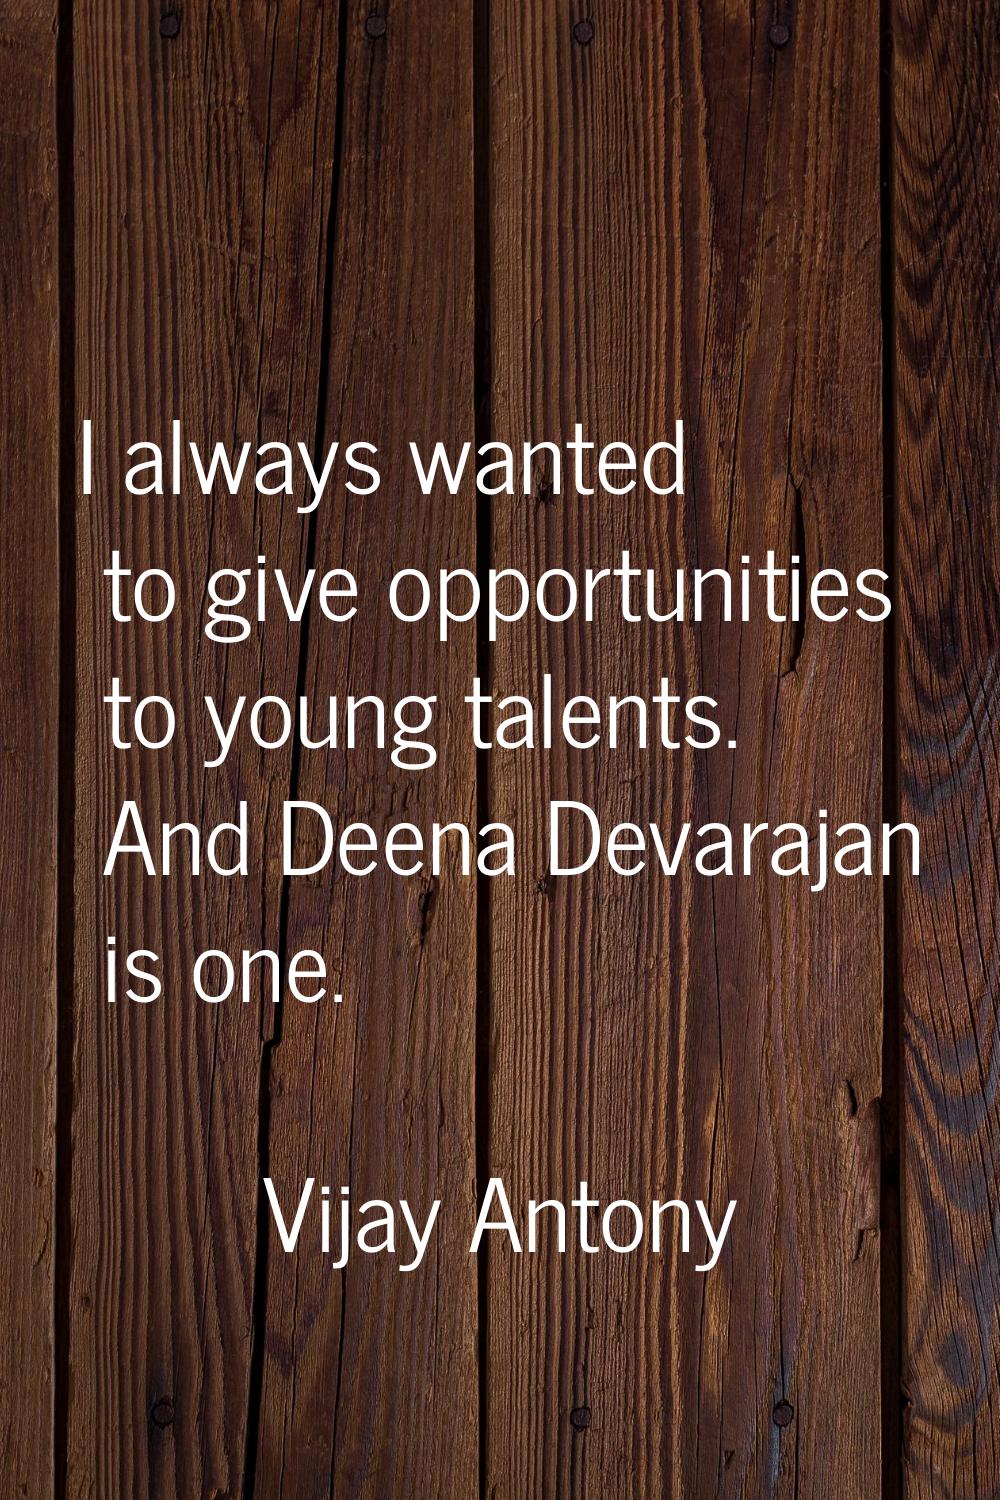 I always wanted to give opportunities to young talents. And Deena Devarajan is one.